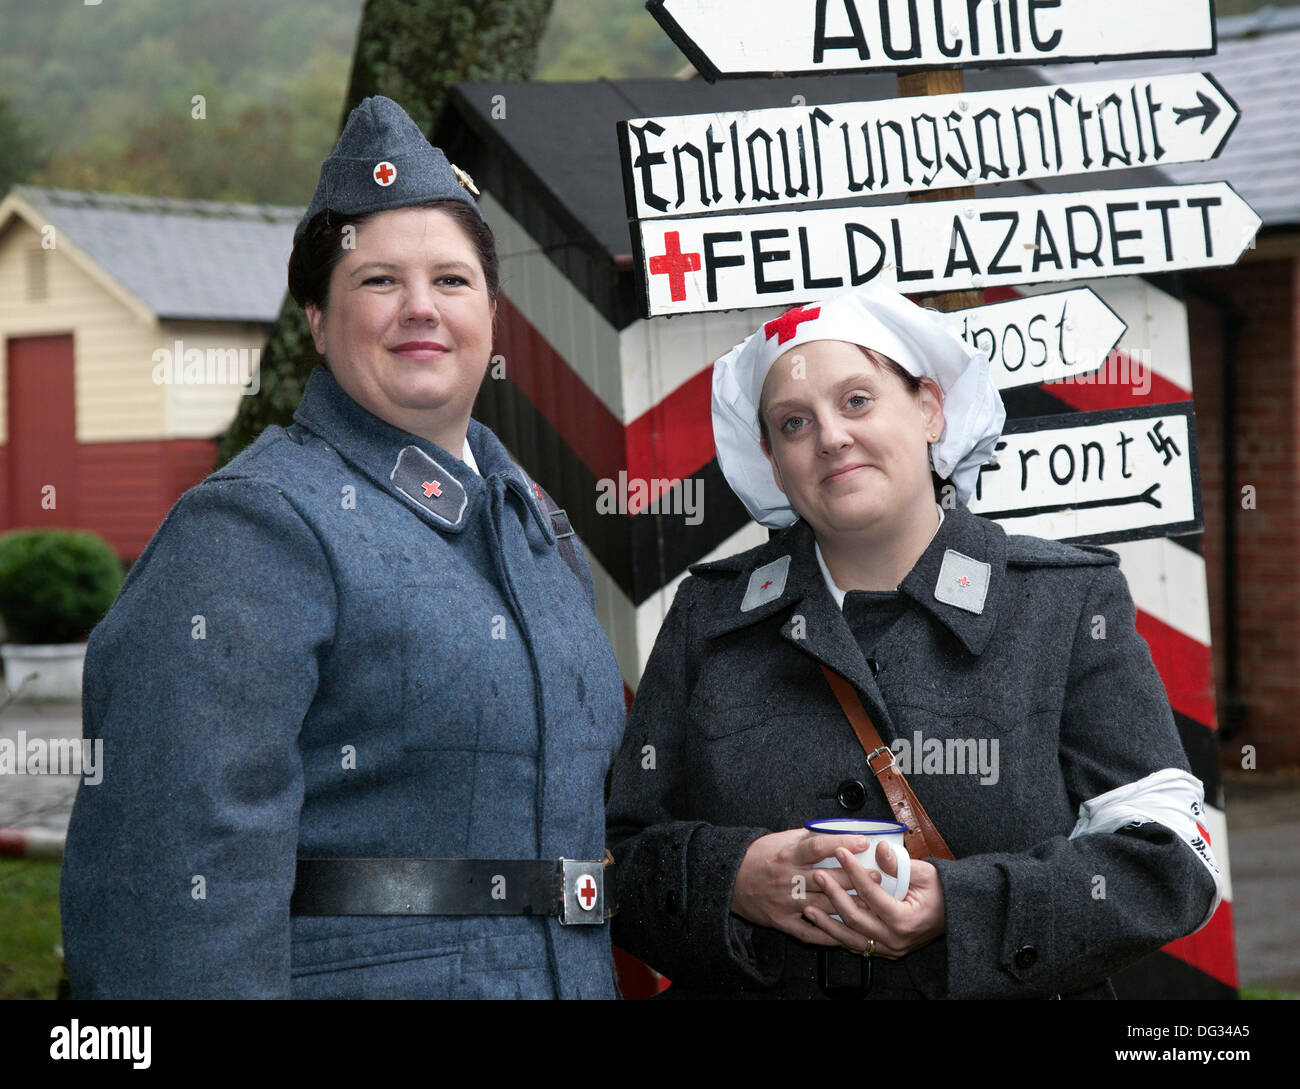 Levisham. North Yorkshire, UK.  11th October, 2013. Kim Castle & Vicki Watson Red Cross Aux nurses at the ‘Railway in Wartime’  North Yorks Moors Railway (NYMR) event at Levisham Railway Station 12th-13th October 2013.   Levisham Station, was decorated with period posters, and French signs  during the (NYMR) ‘Wartime Weekend’ to become  ‘Le Visham’ in northern France. The gathering, a recreation of a French village occupied by German troops, being part of the ‘Allo Allo’-style light-hearted and fun mood. Stock Photo